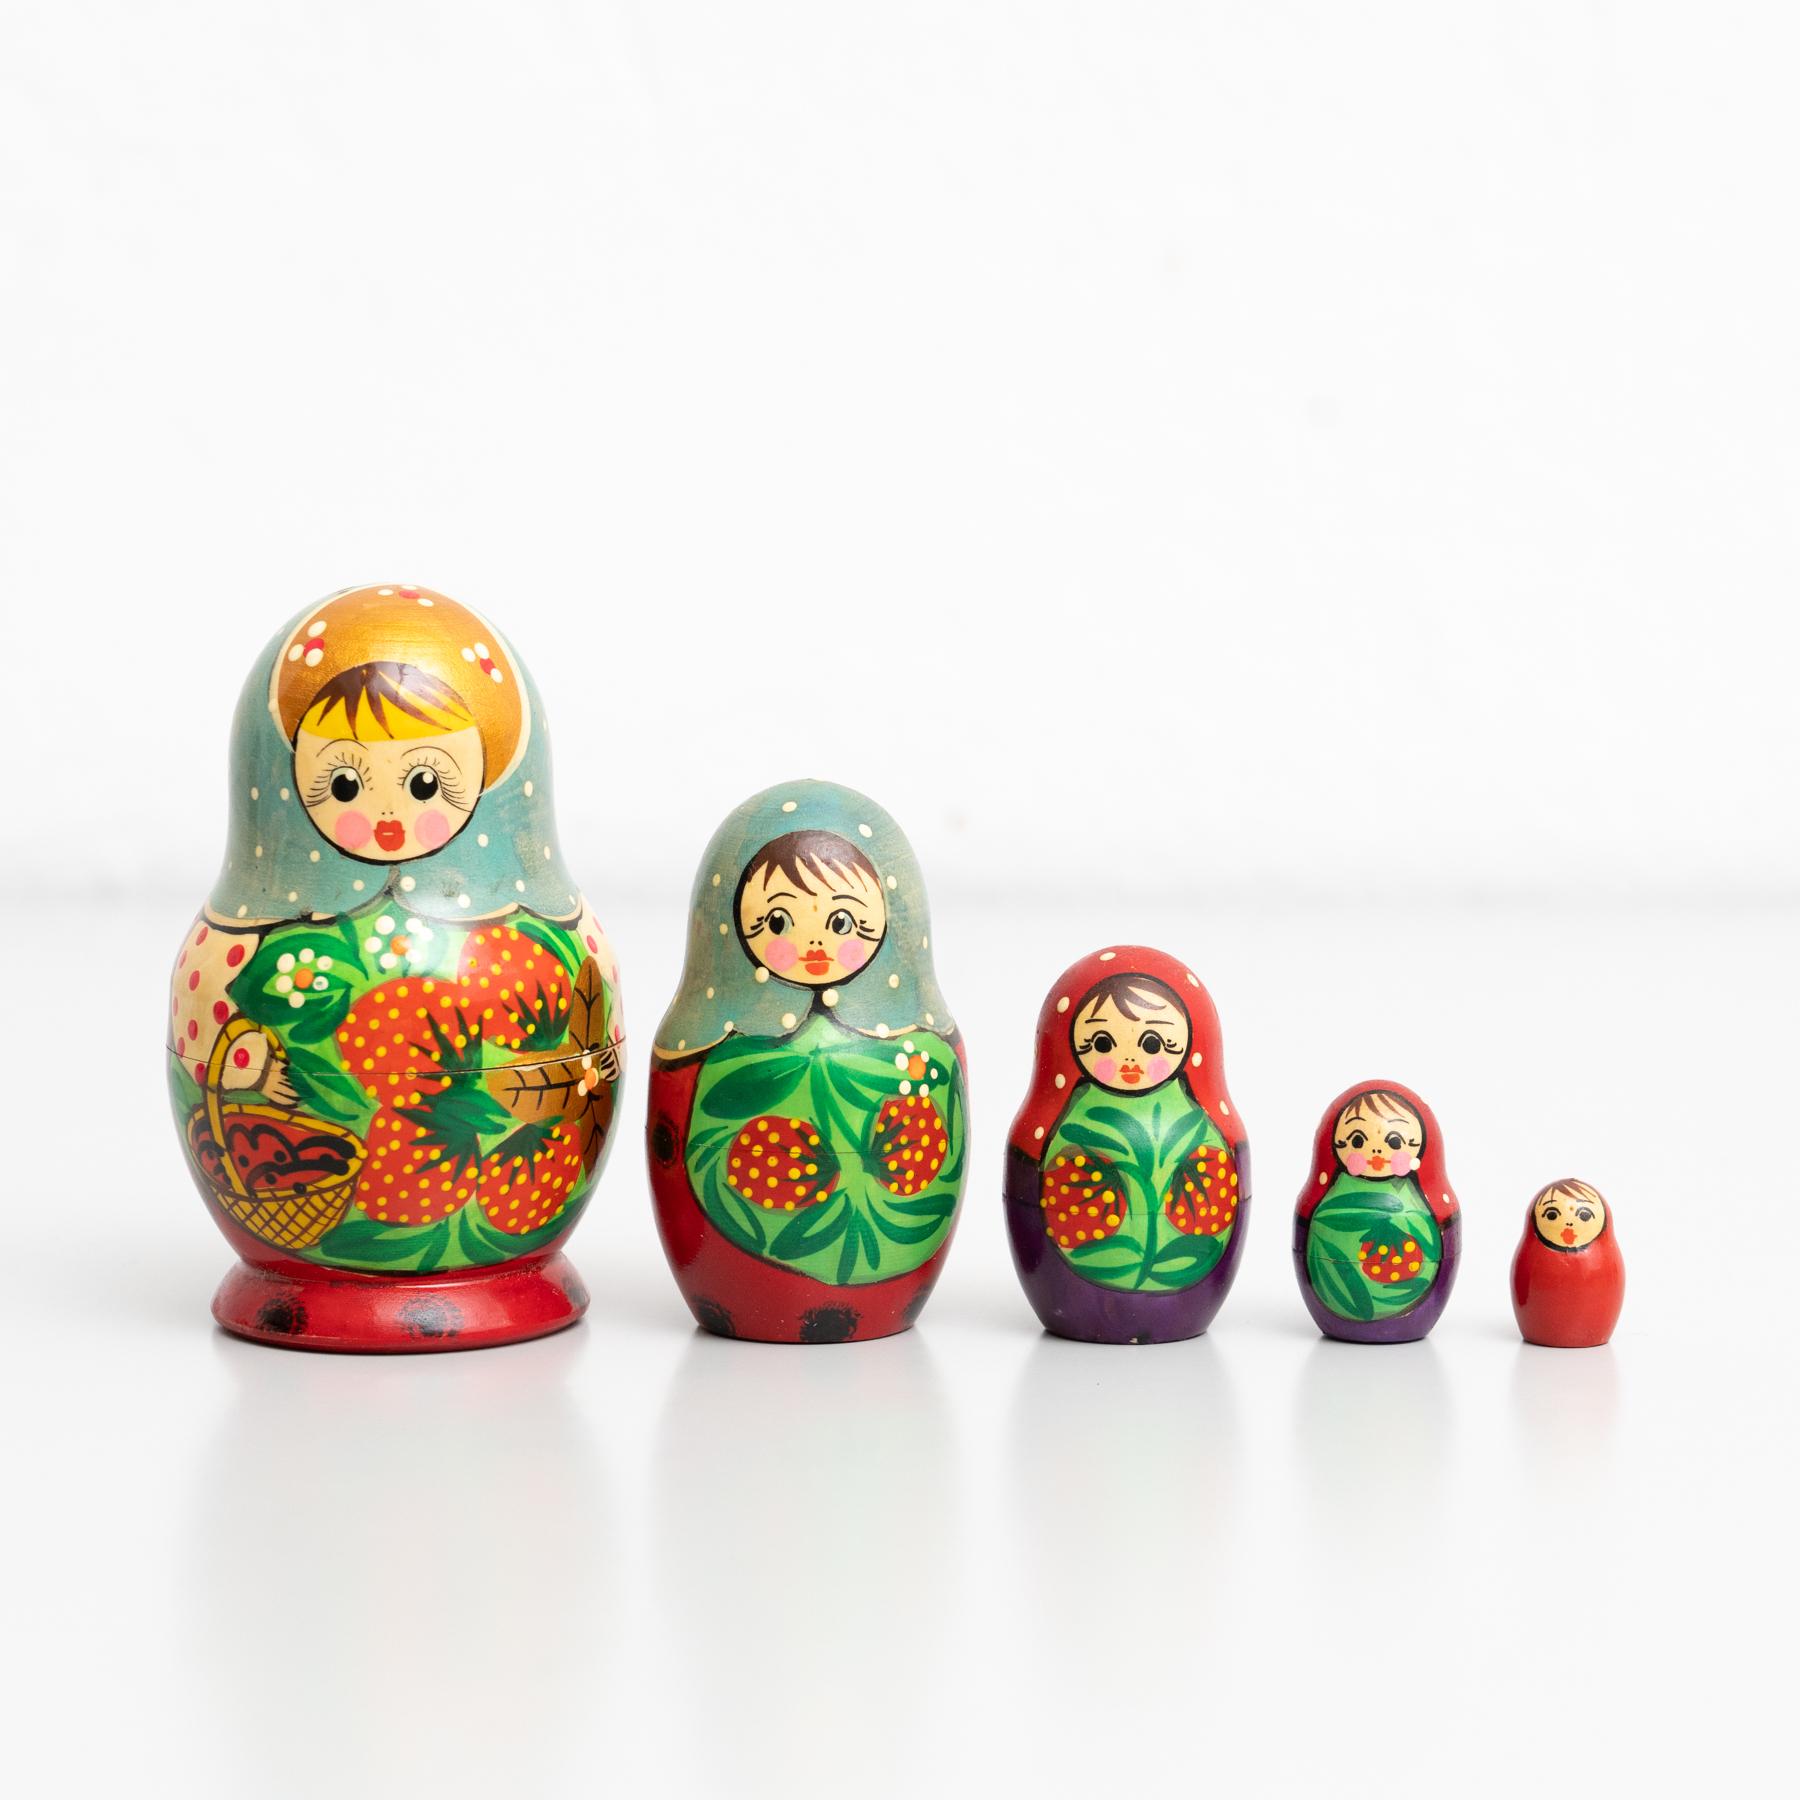 Antique Traditional Hand-Painted Wooden Russian Doll, circa 1960 For Sale 8